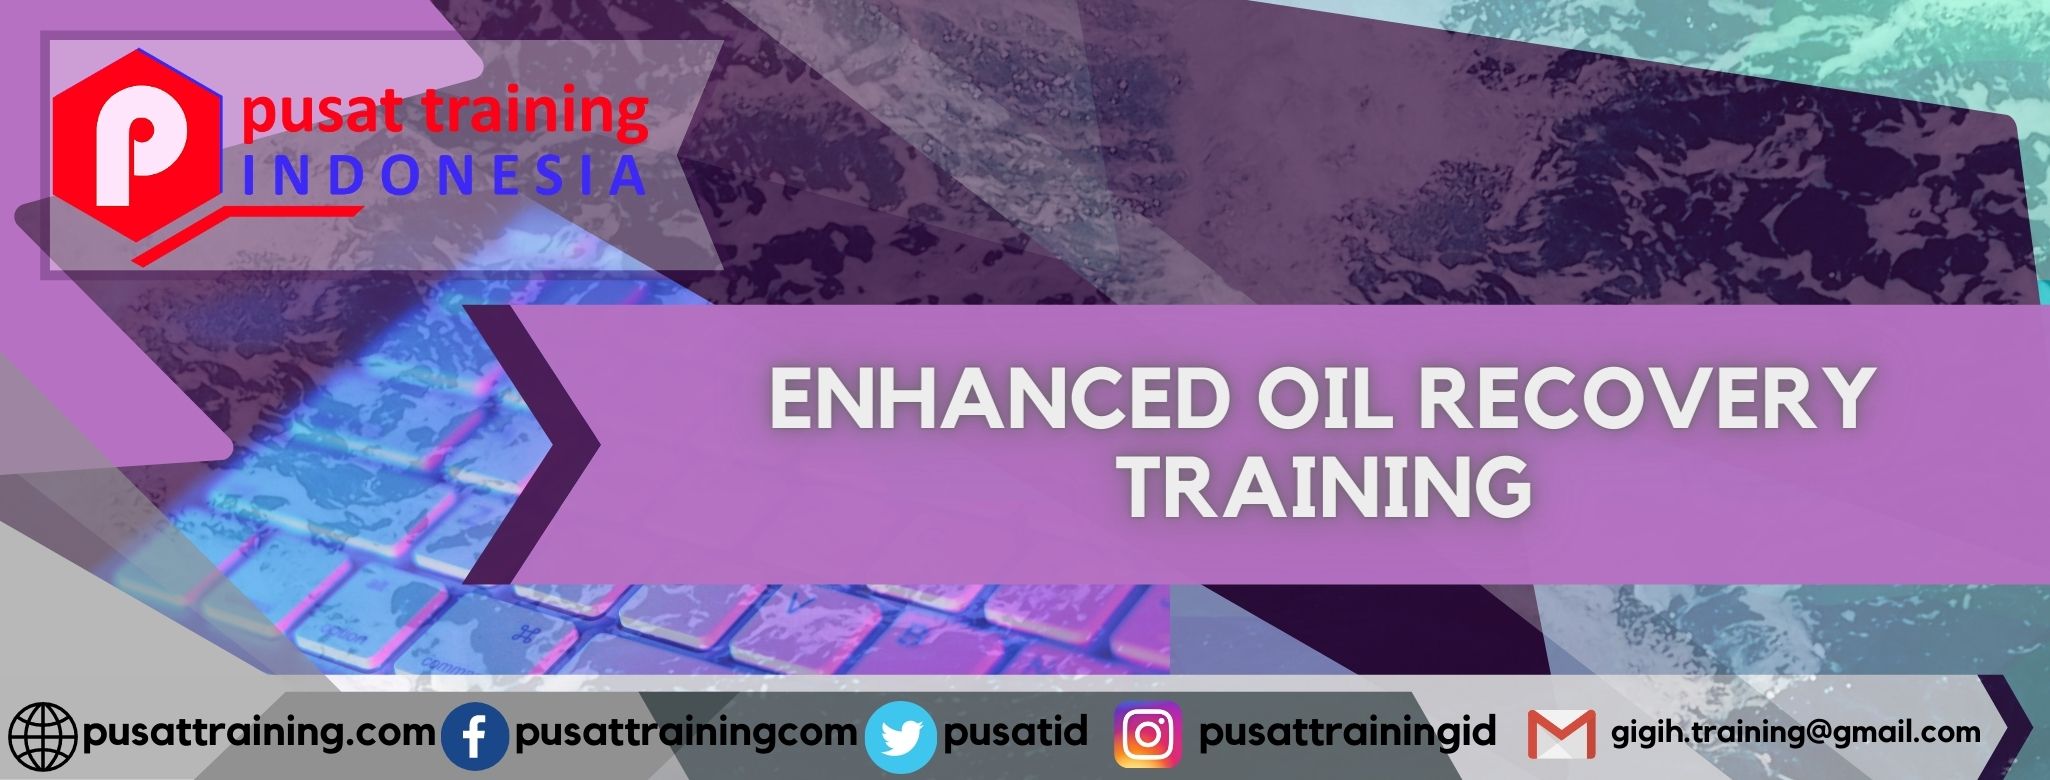 ENHANCED OIL RECOVERY TRAINING